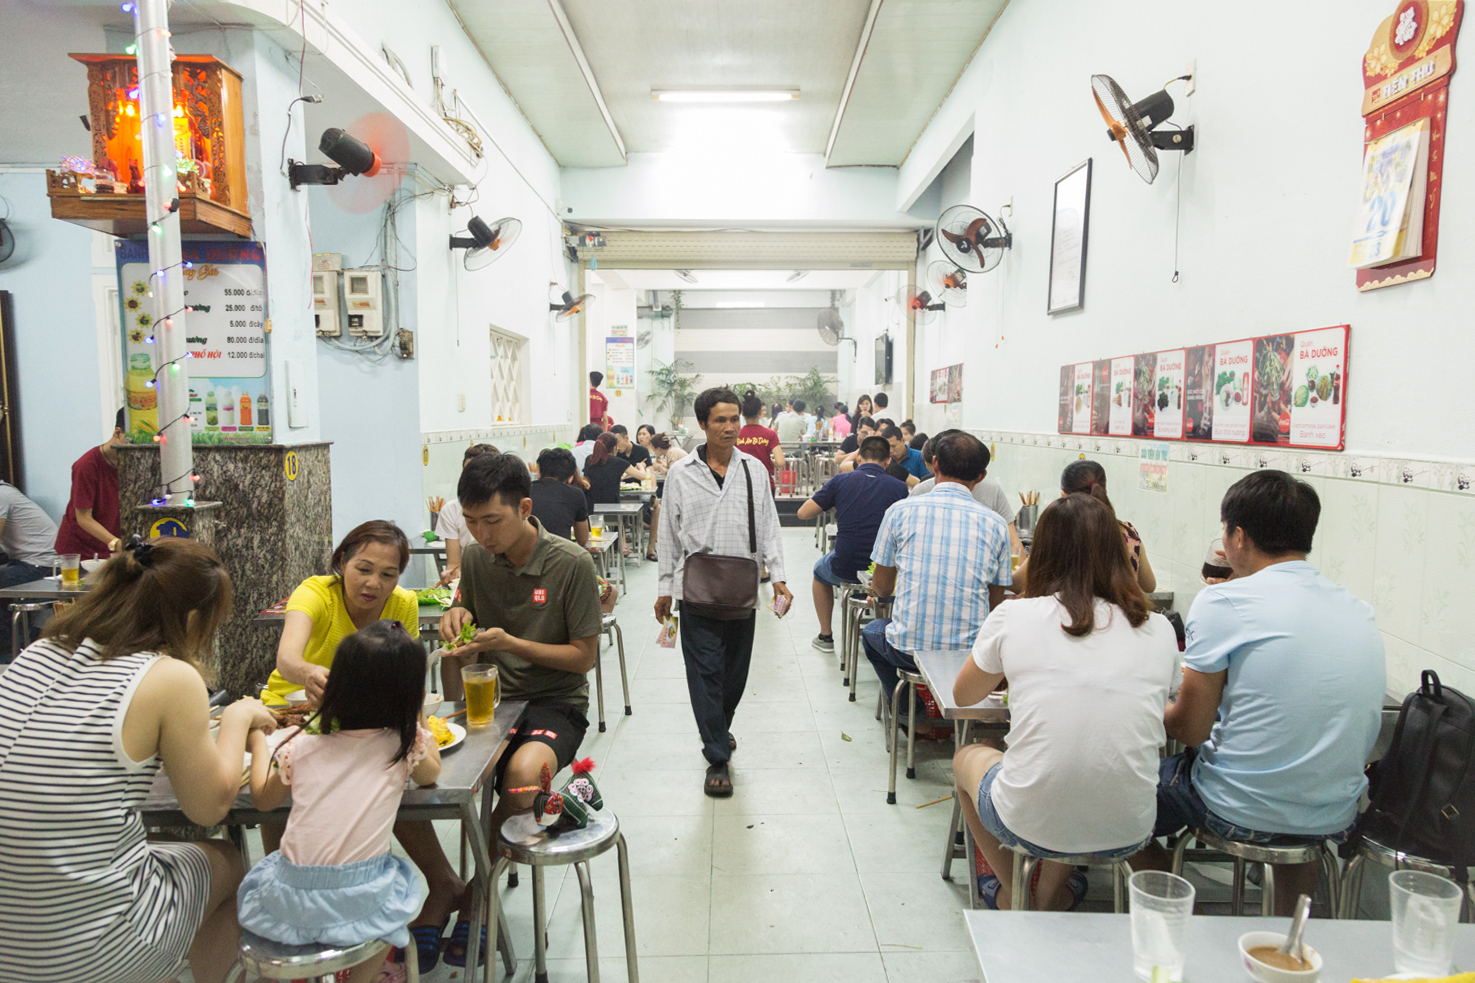 Eating with Focus: Single Dish Restaurants in Central Vietnam